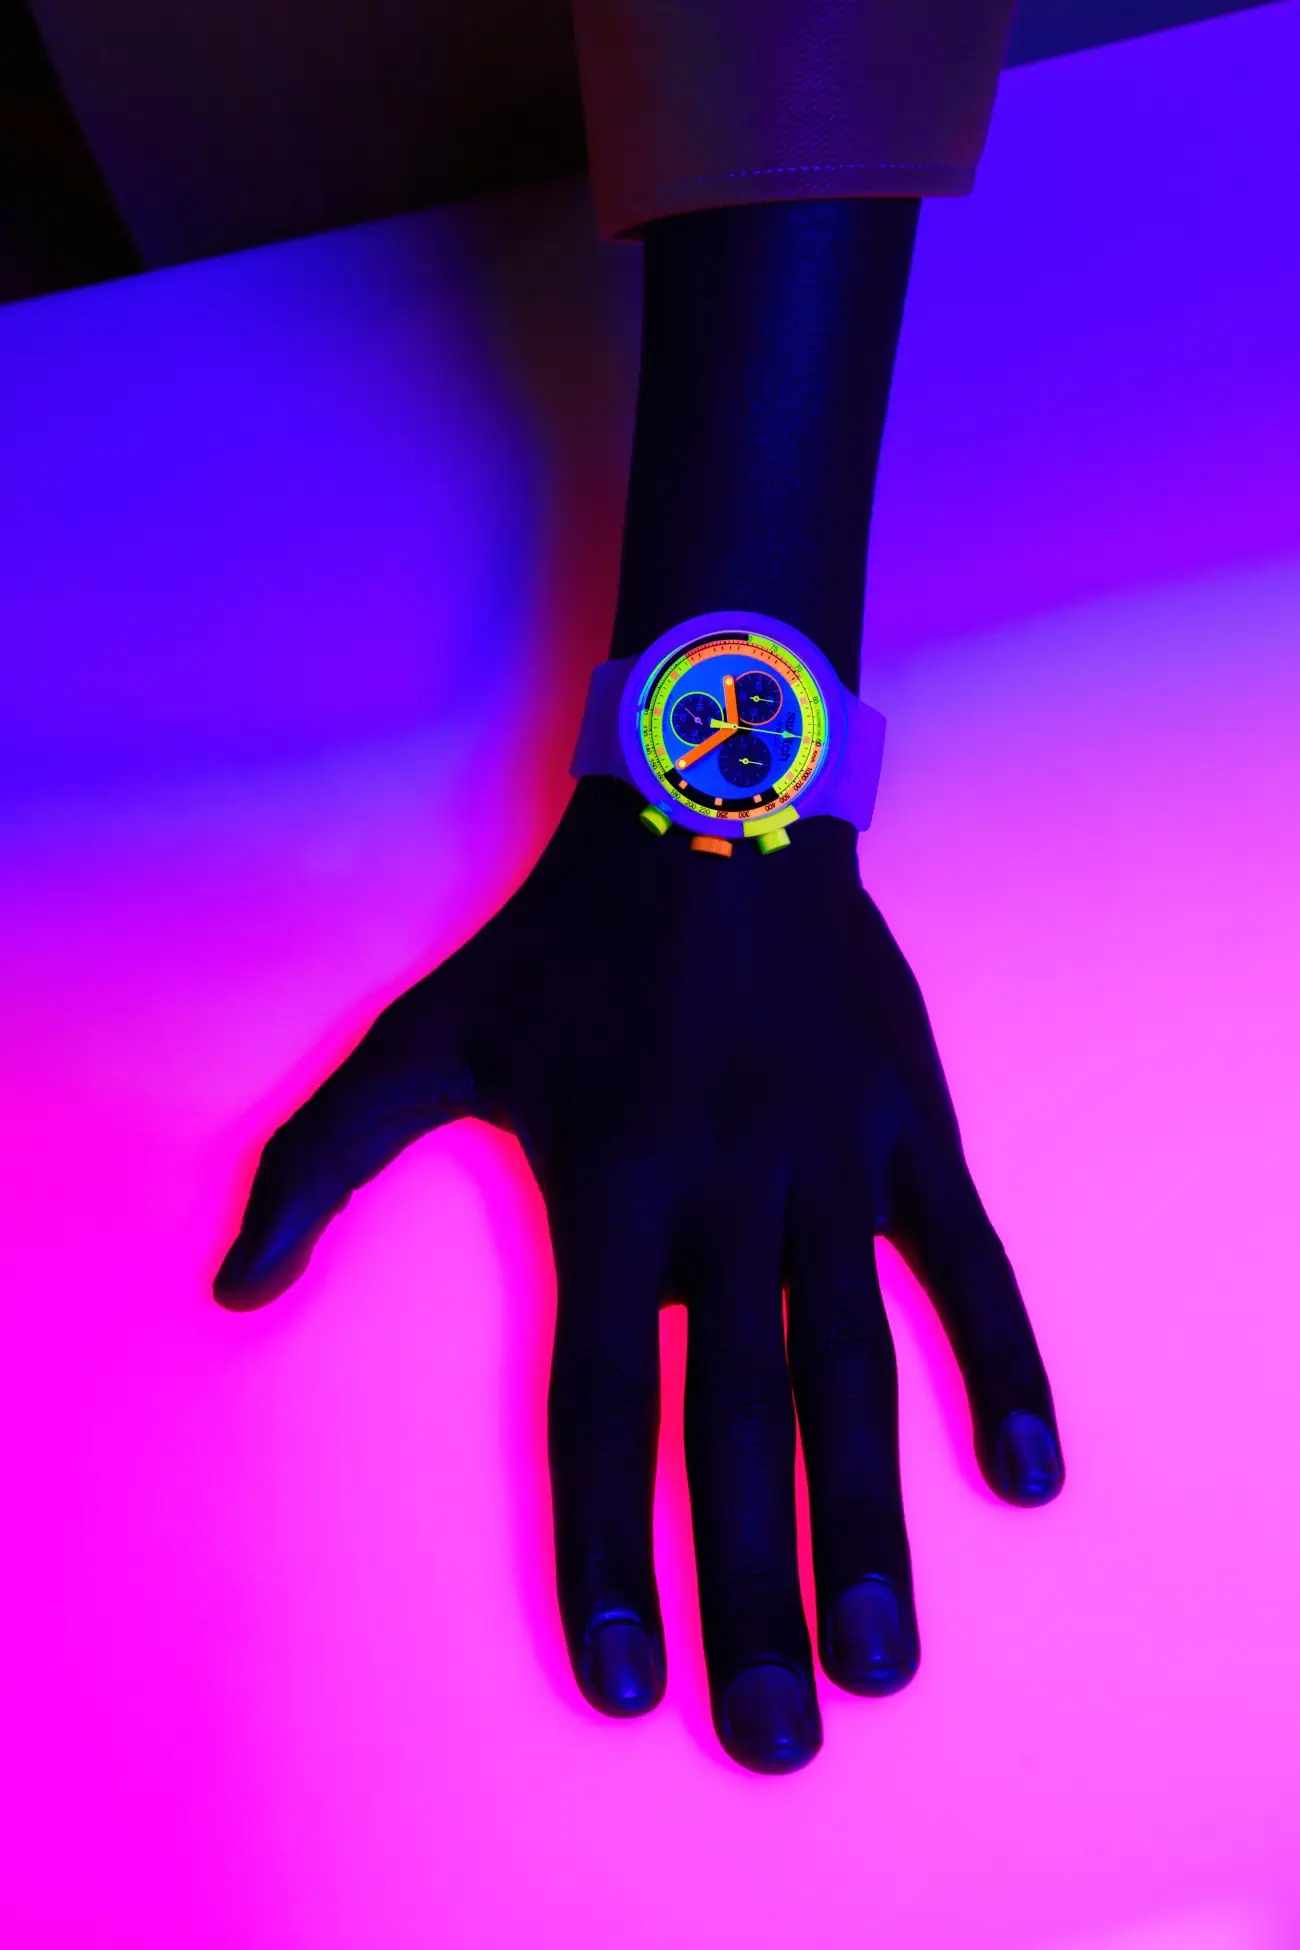 The Swatch Neon Collection returns with a bright new take on iconic designs